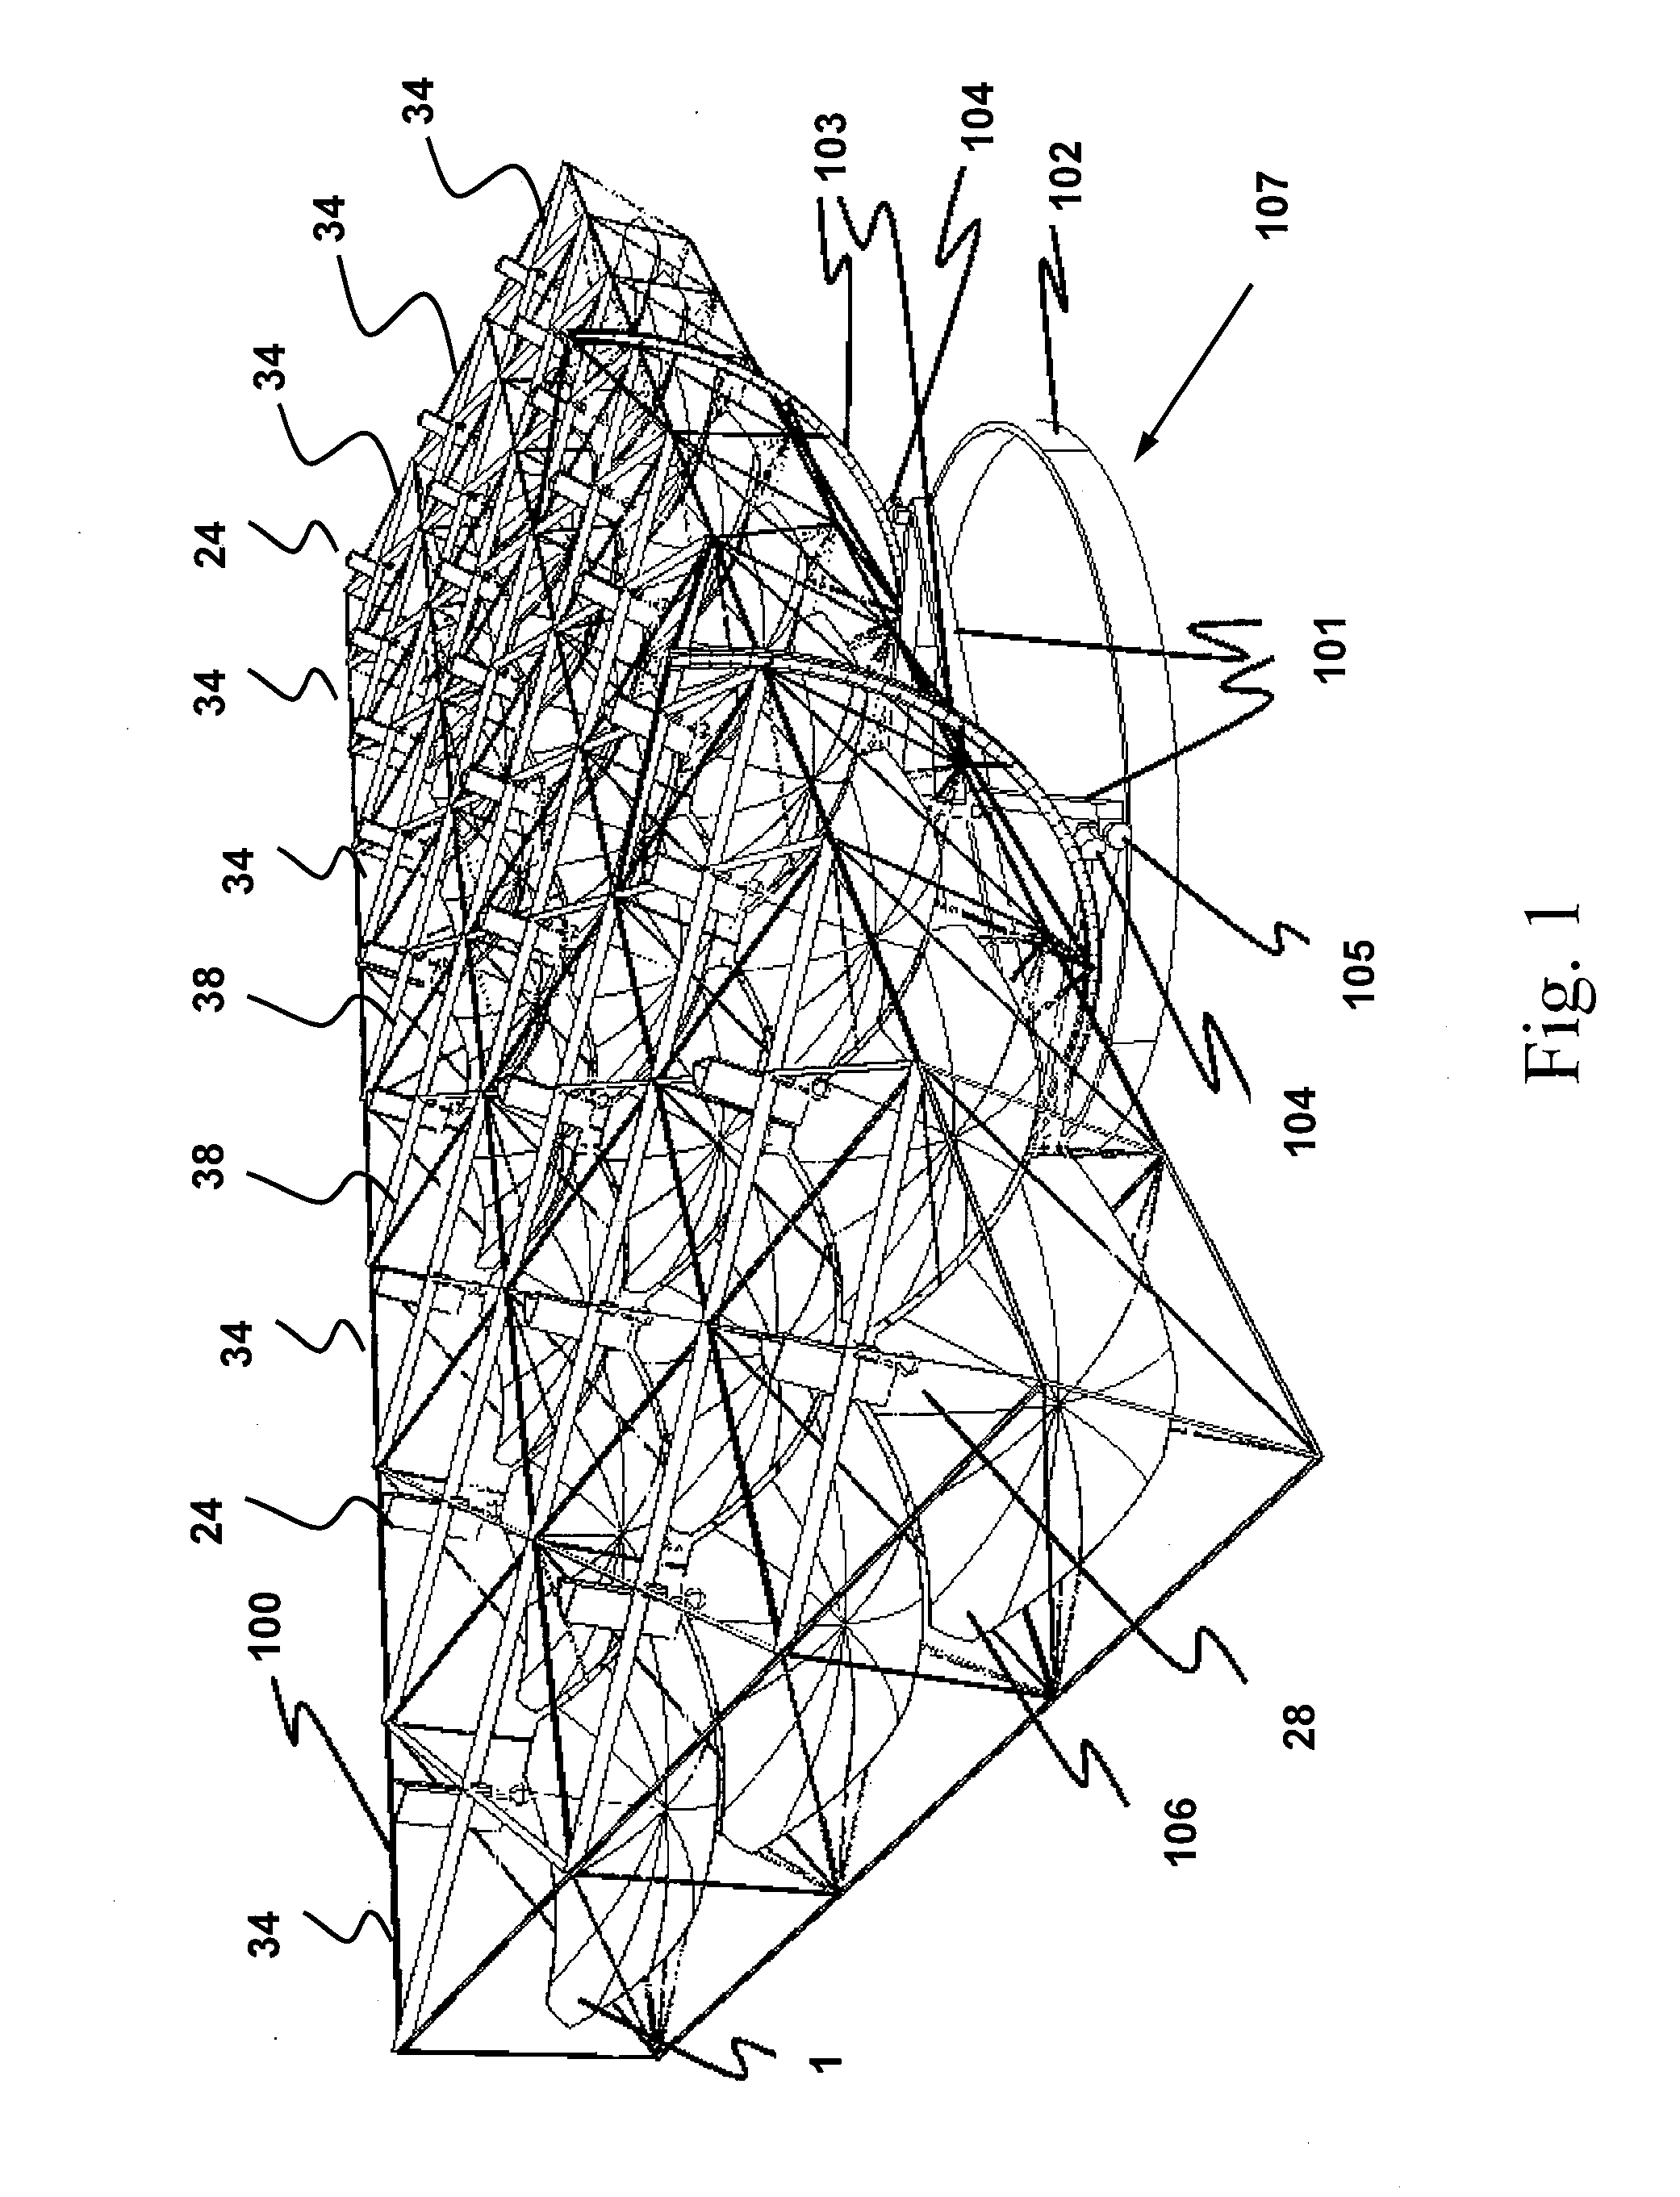 Solar concentrator apparatus with large, multiple, co-axial dish reflectors